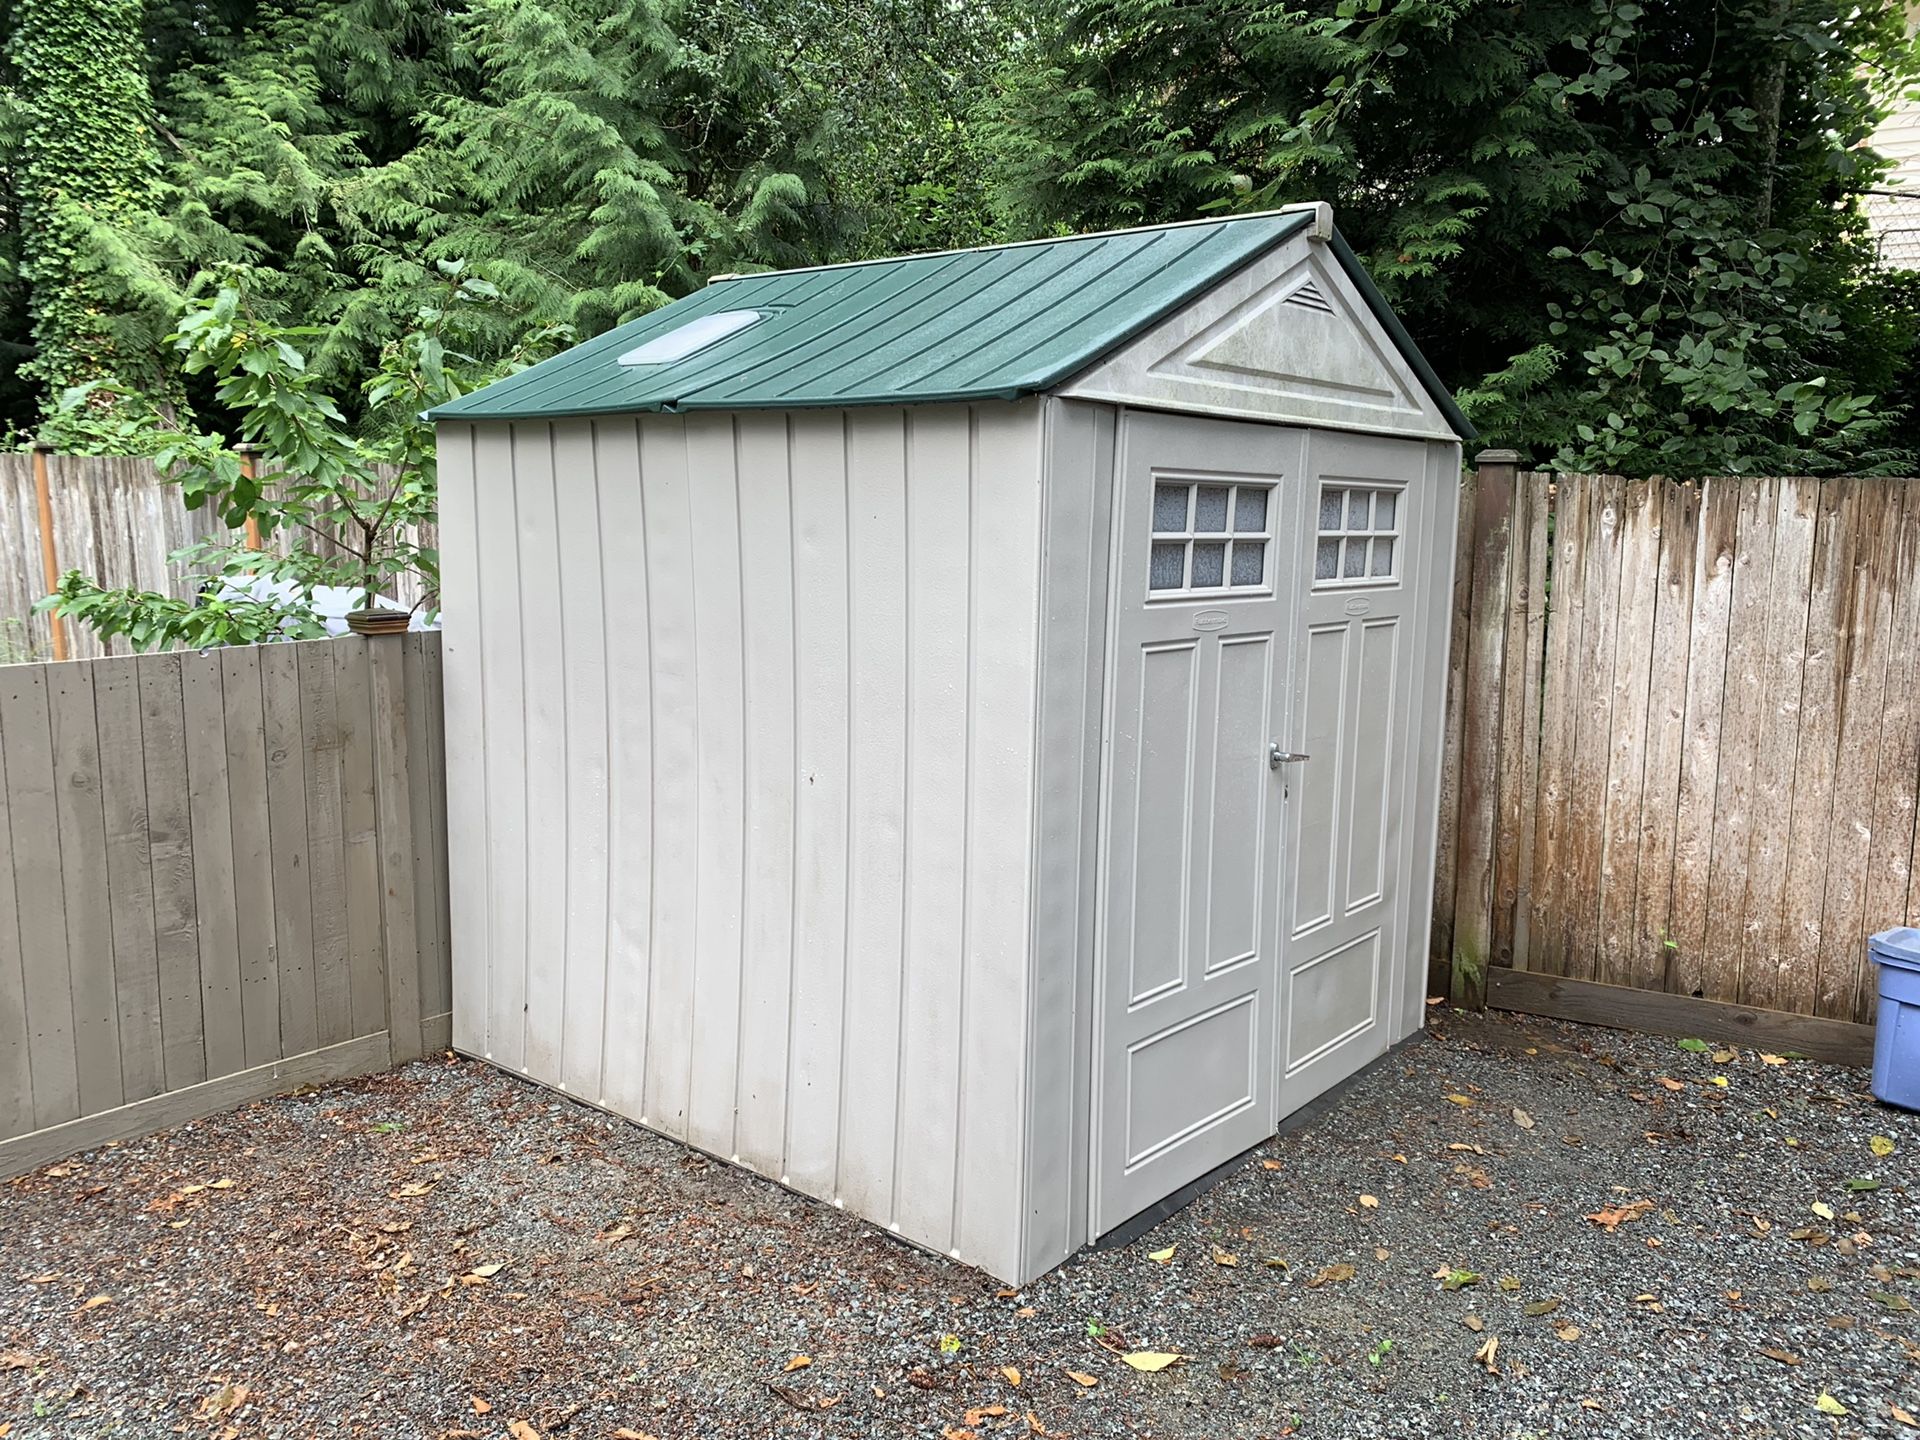 Rubbermaid shed 7x7